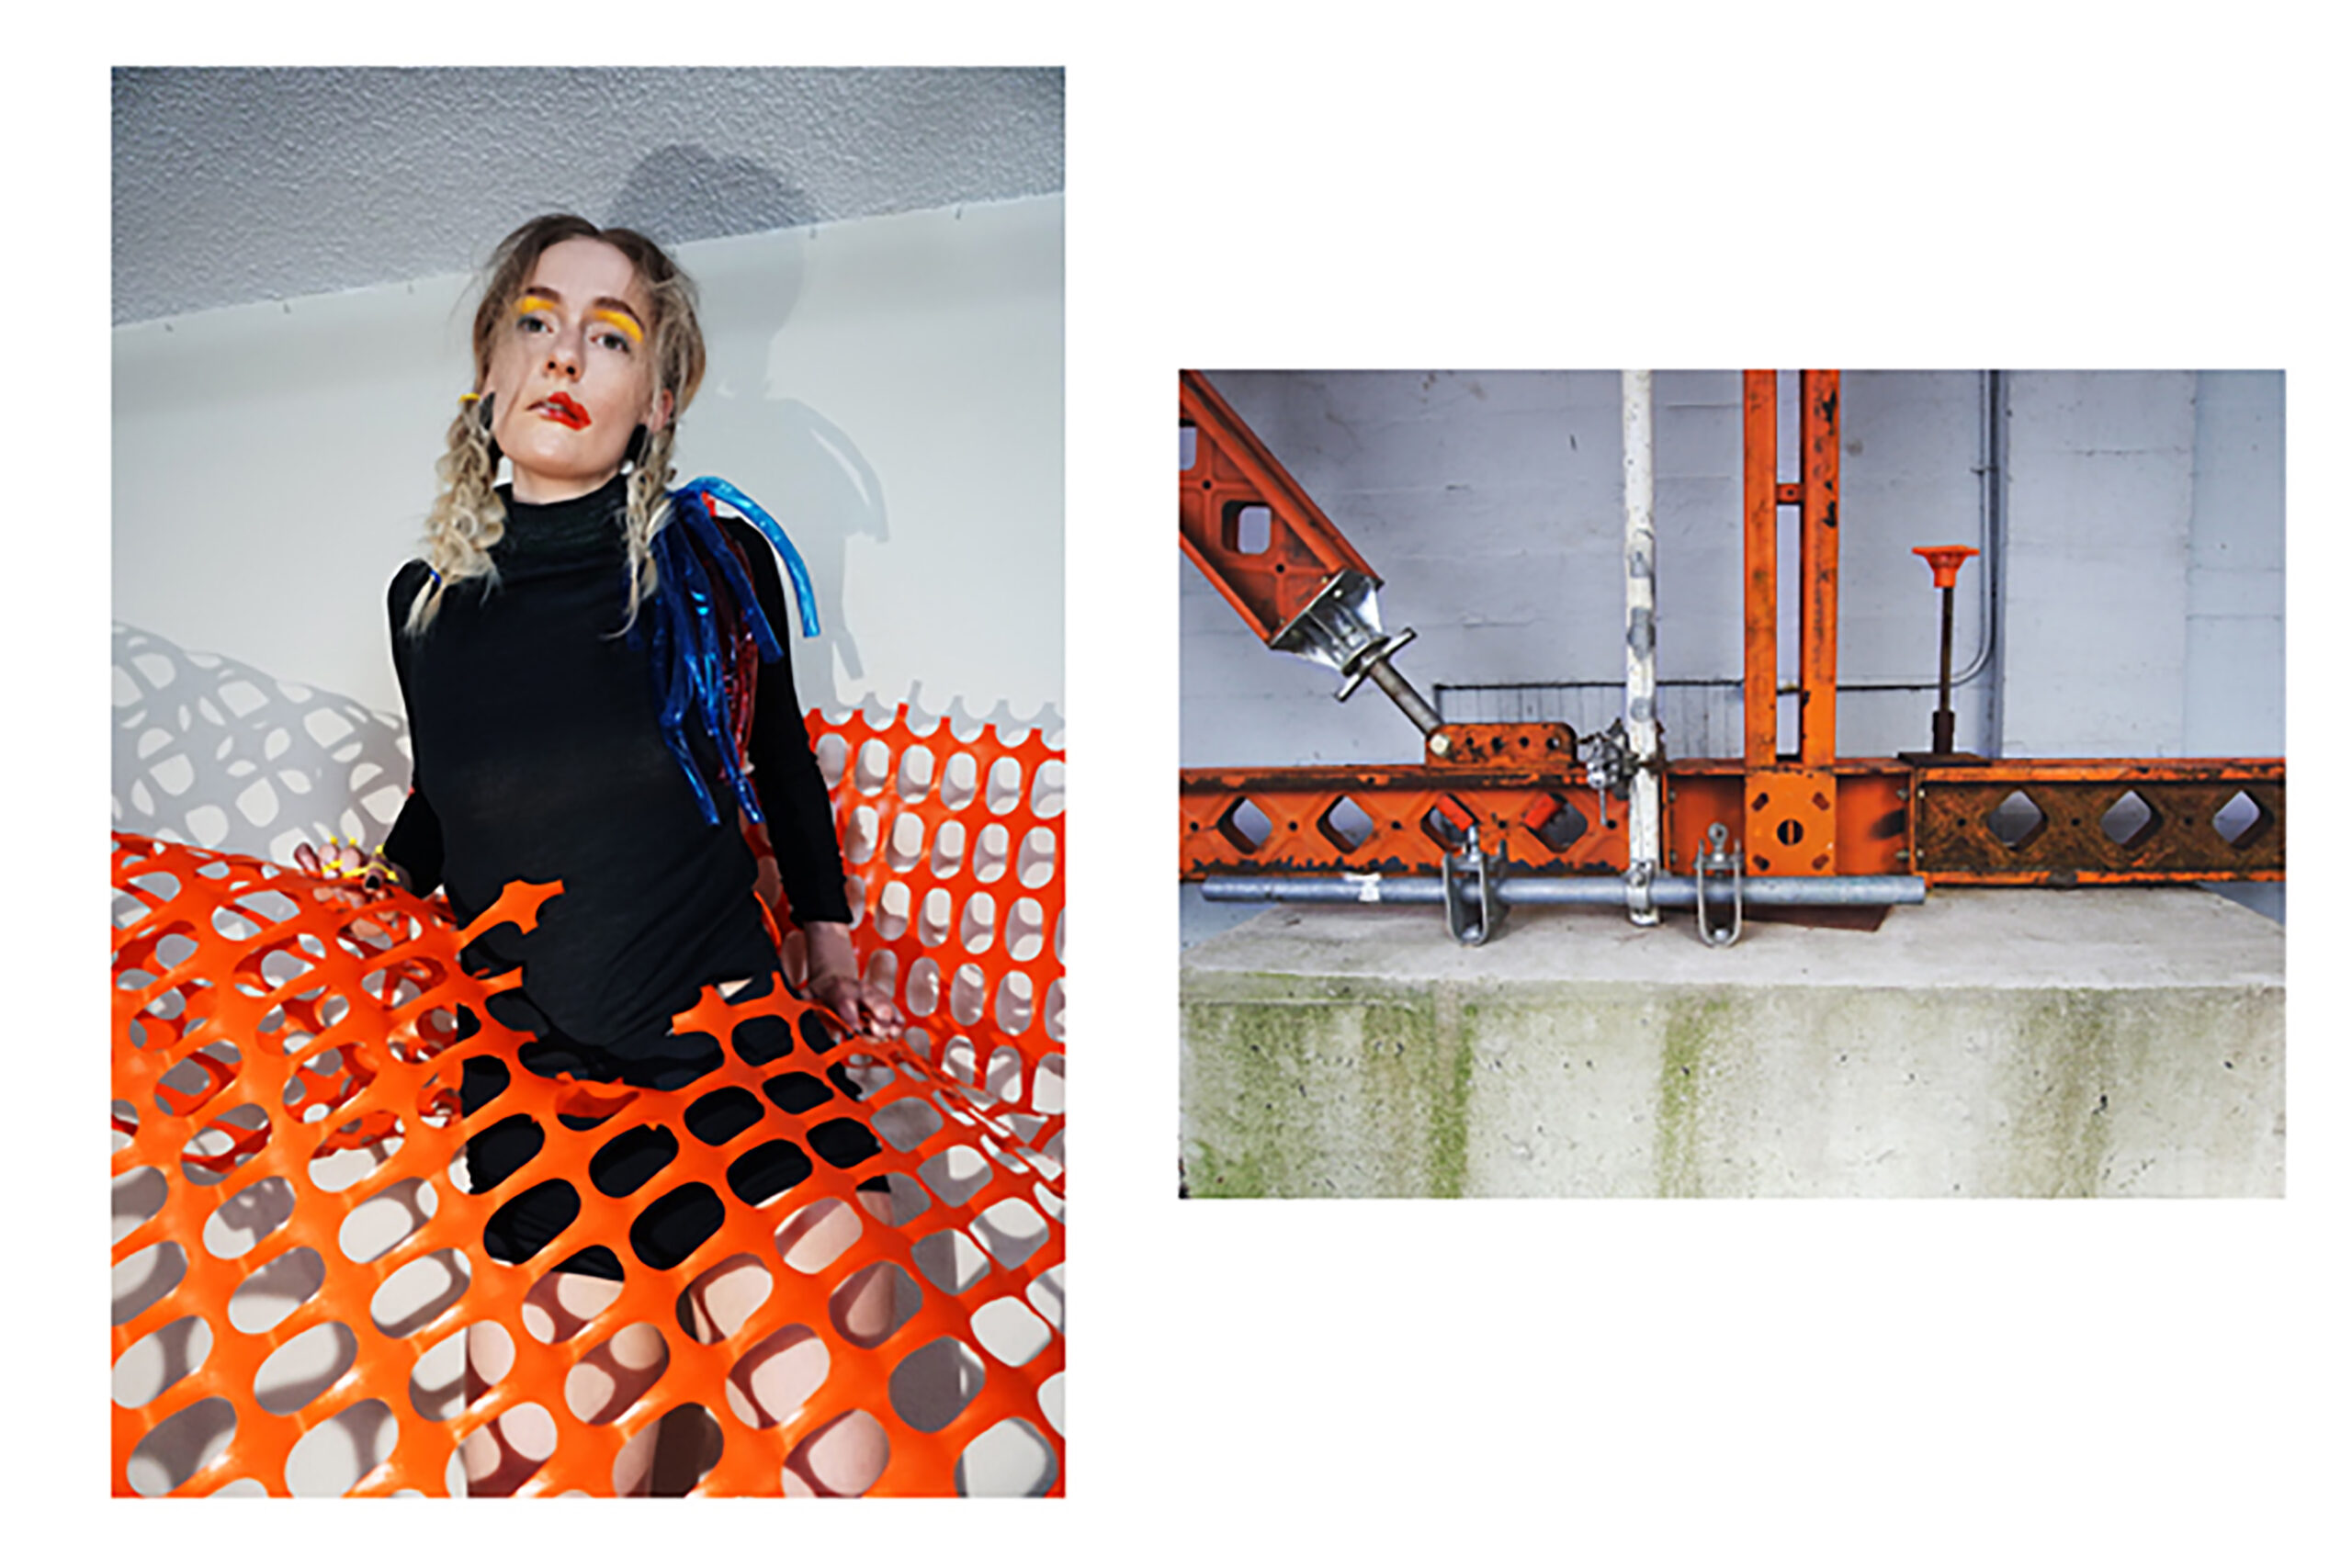 2 images side by side, girl with construction coloured make up wears an orange net in a skirt, next to an image of orange metal structural beams